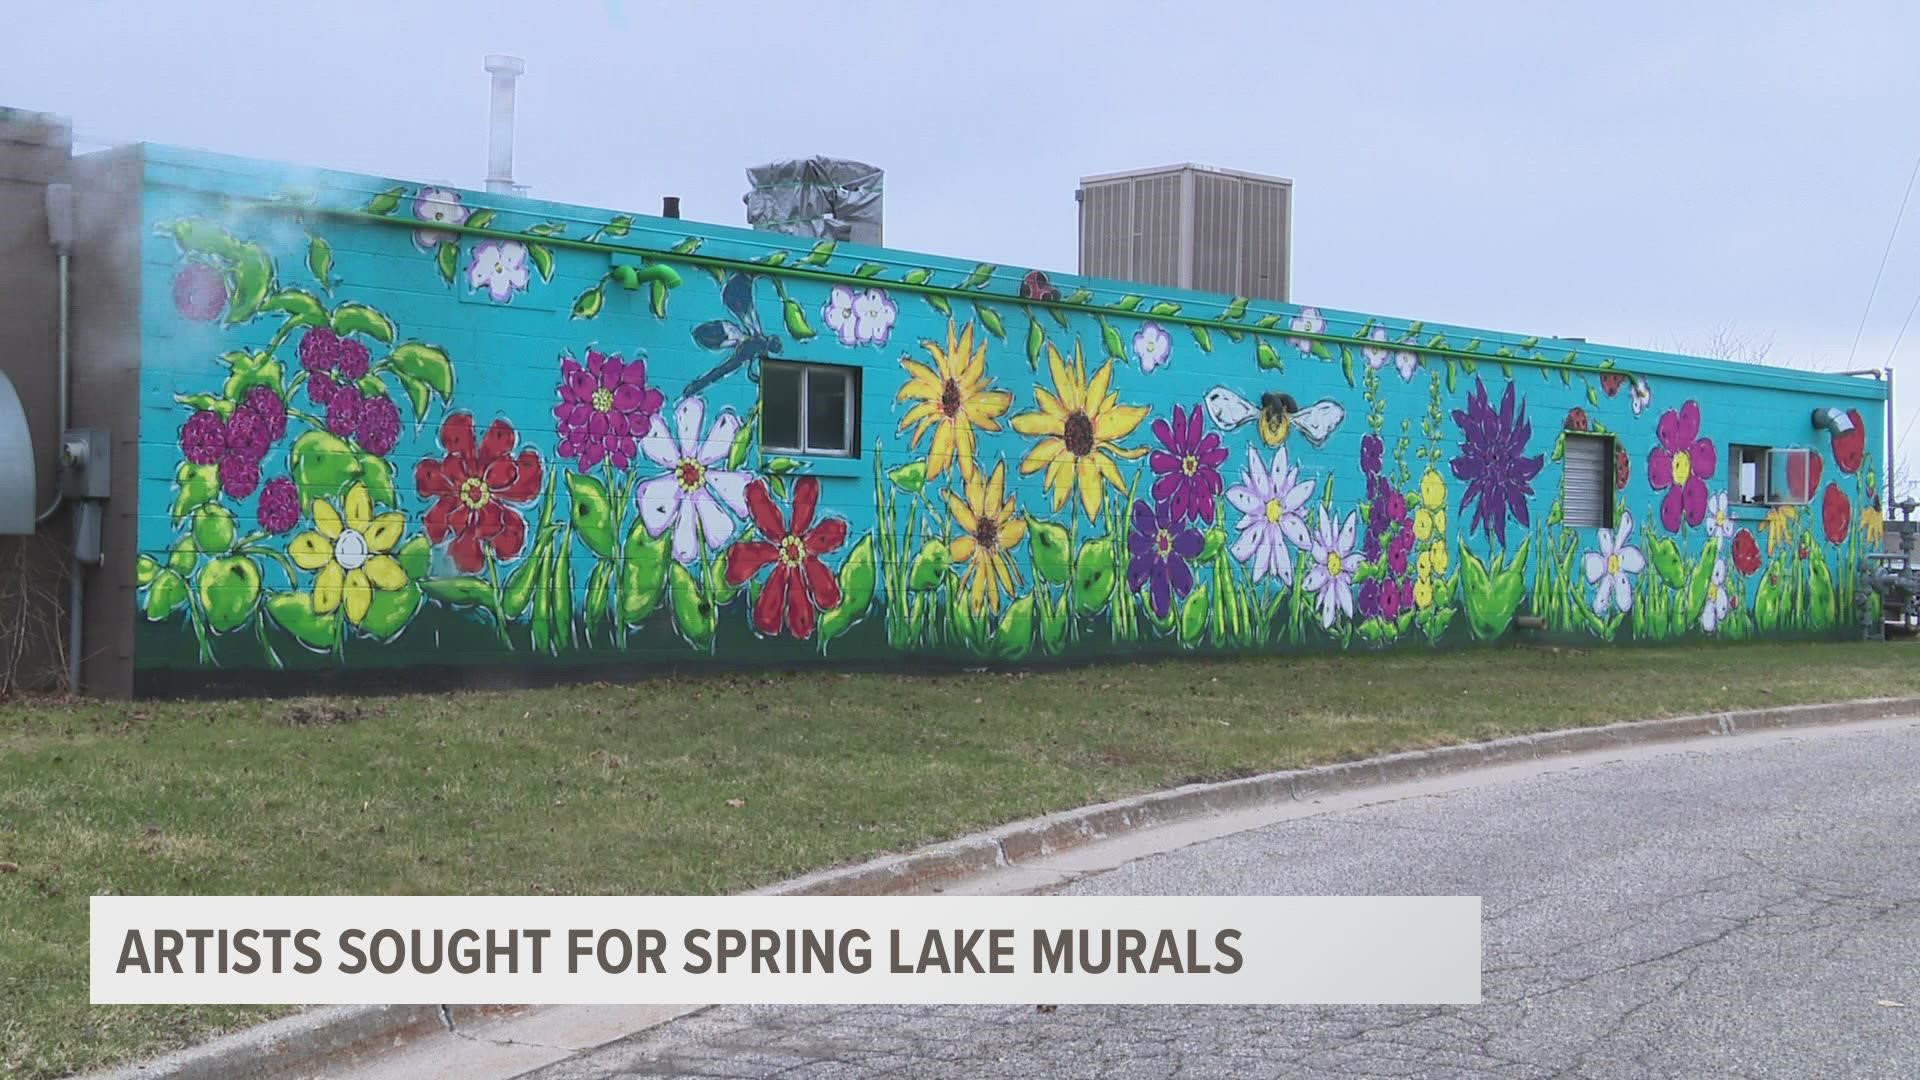 The Village of Spring Lake is looking for "creative, vibrant and engaging design proposals" to paint murals on two downtown building exteriors.